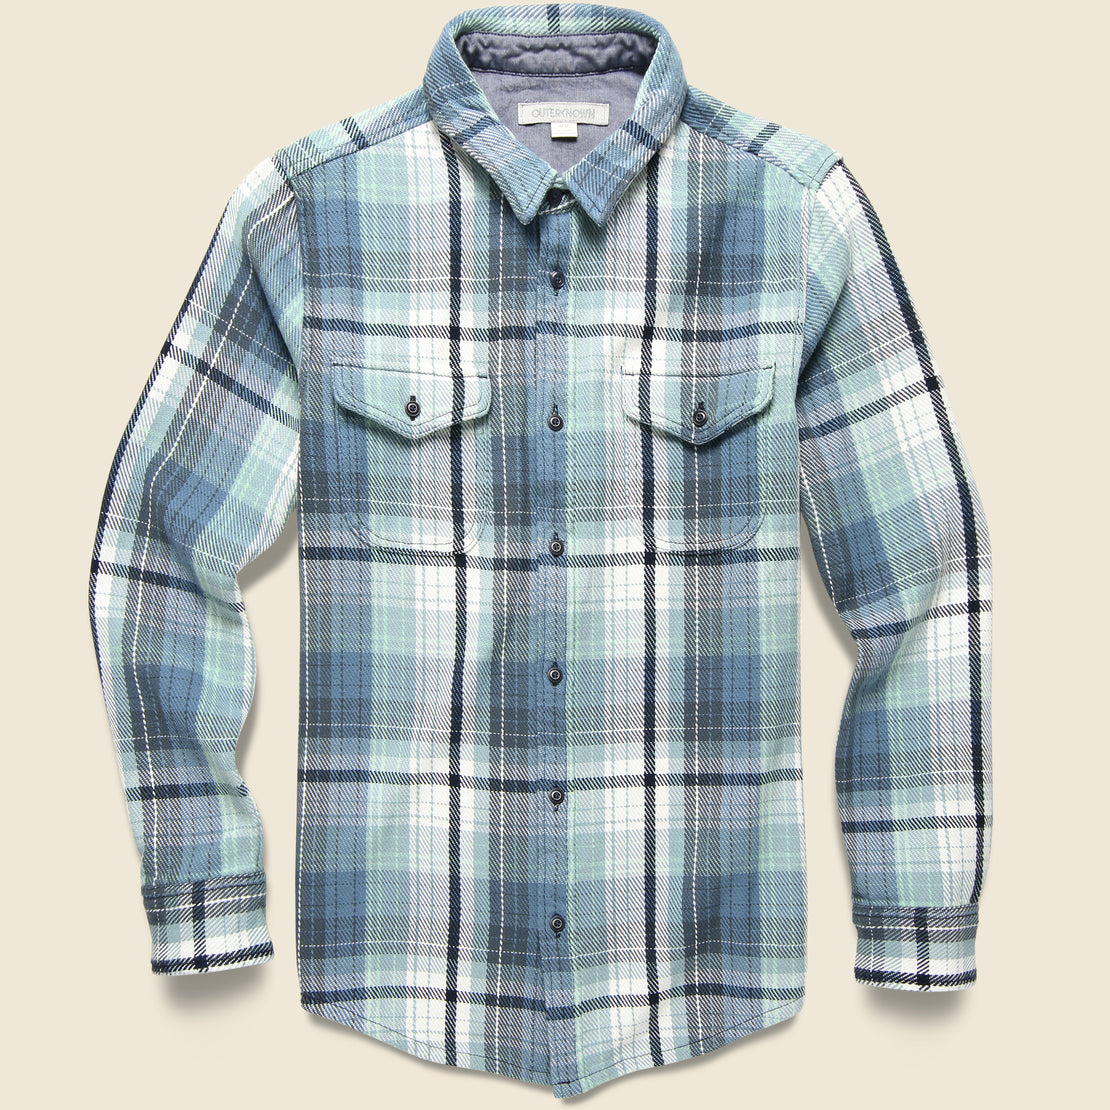 Outerknown Blanket Shirt - Daylight Seaview Plaid